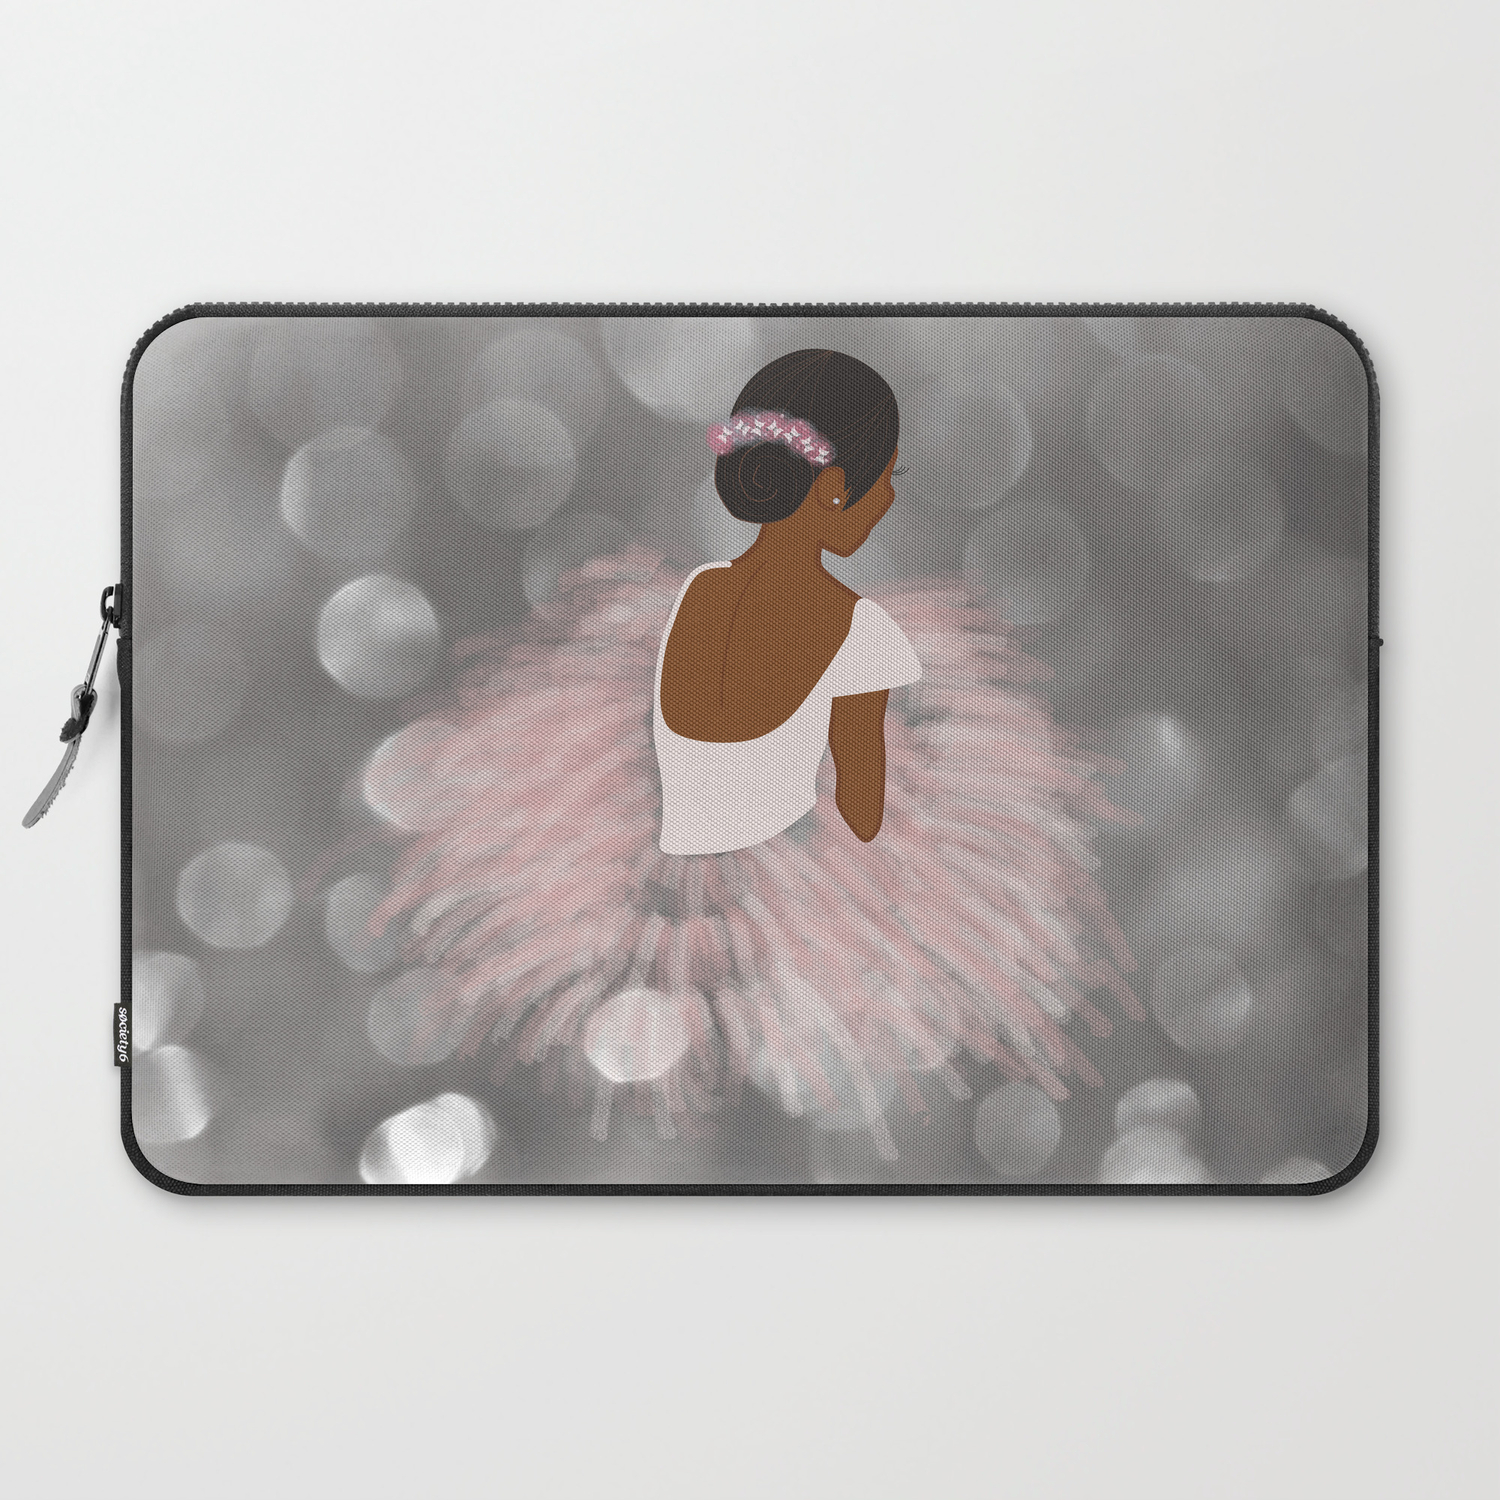 Laptop Sleeve 13 African American Ballerina Dancer by Ume Images on Laptop Sleeve 